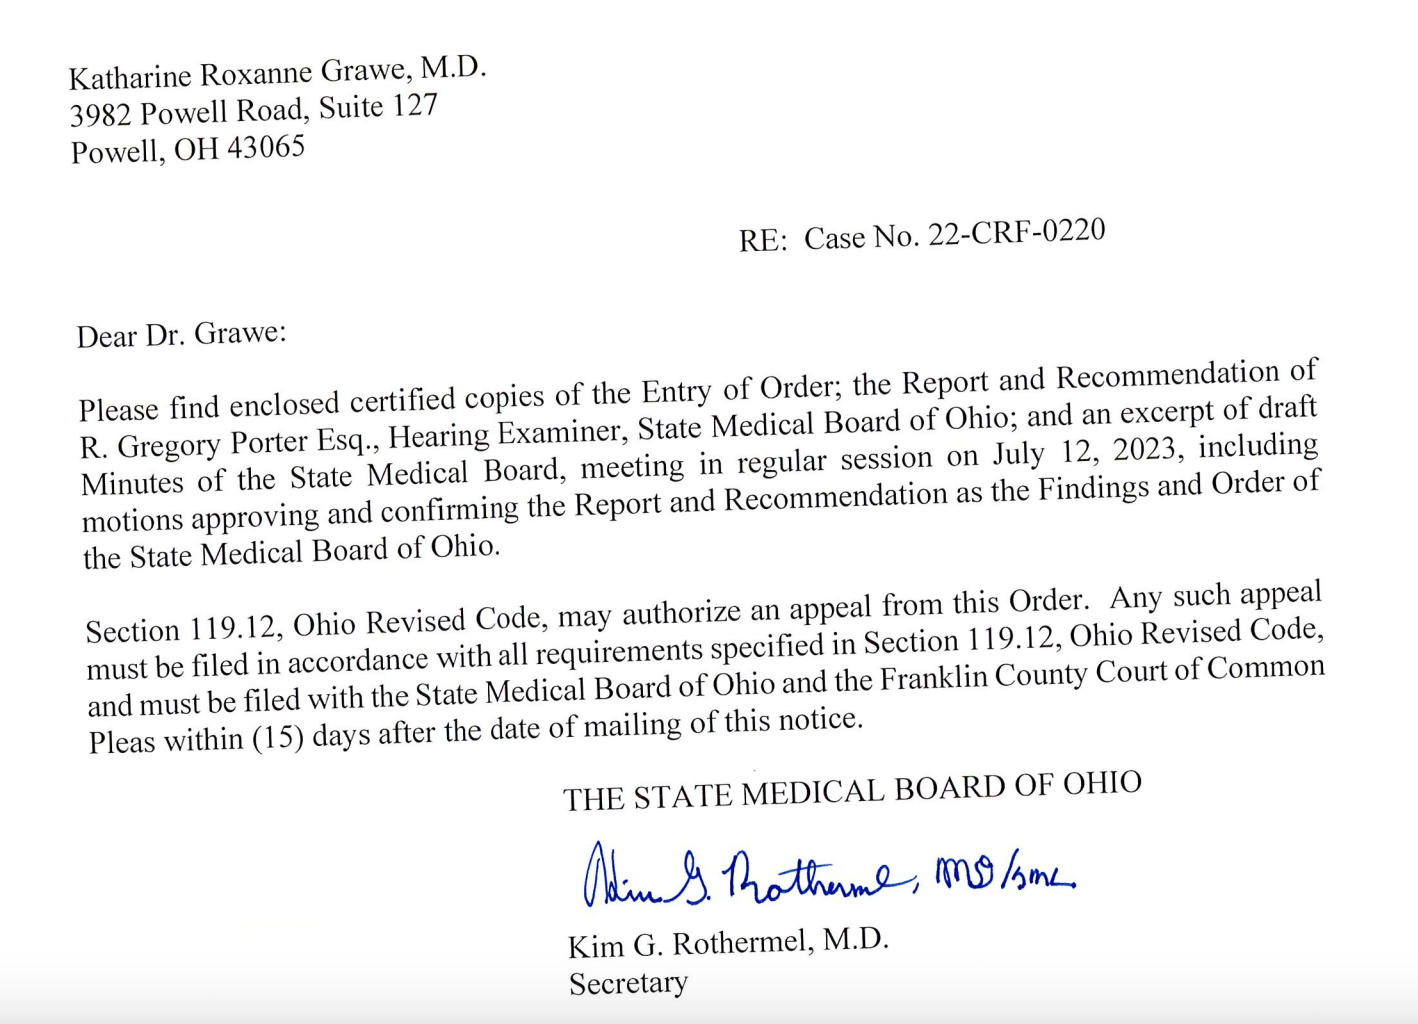 Screenshot of letter from the State Medical Board of Ohio